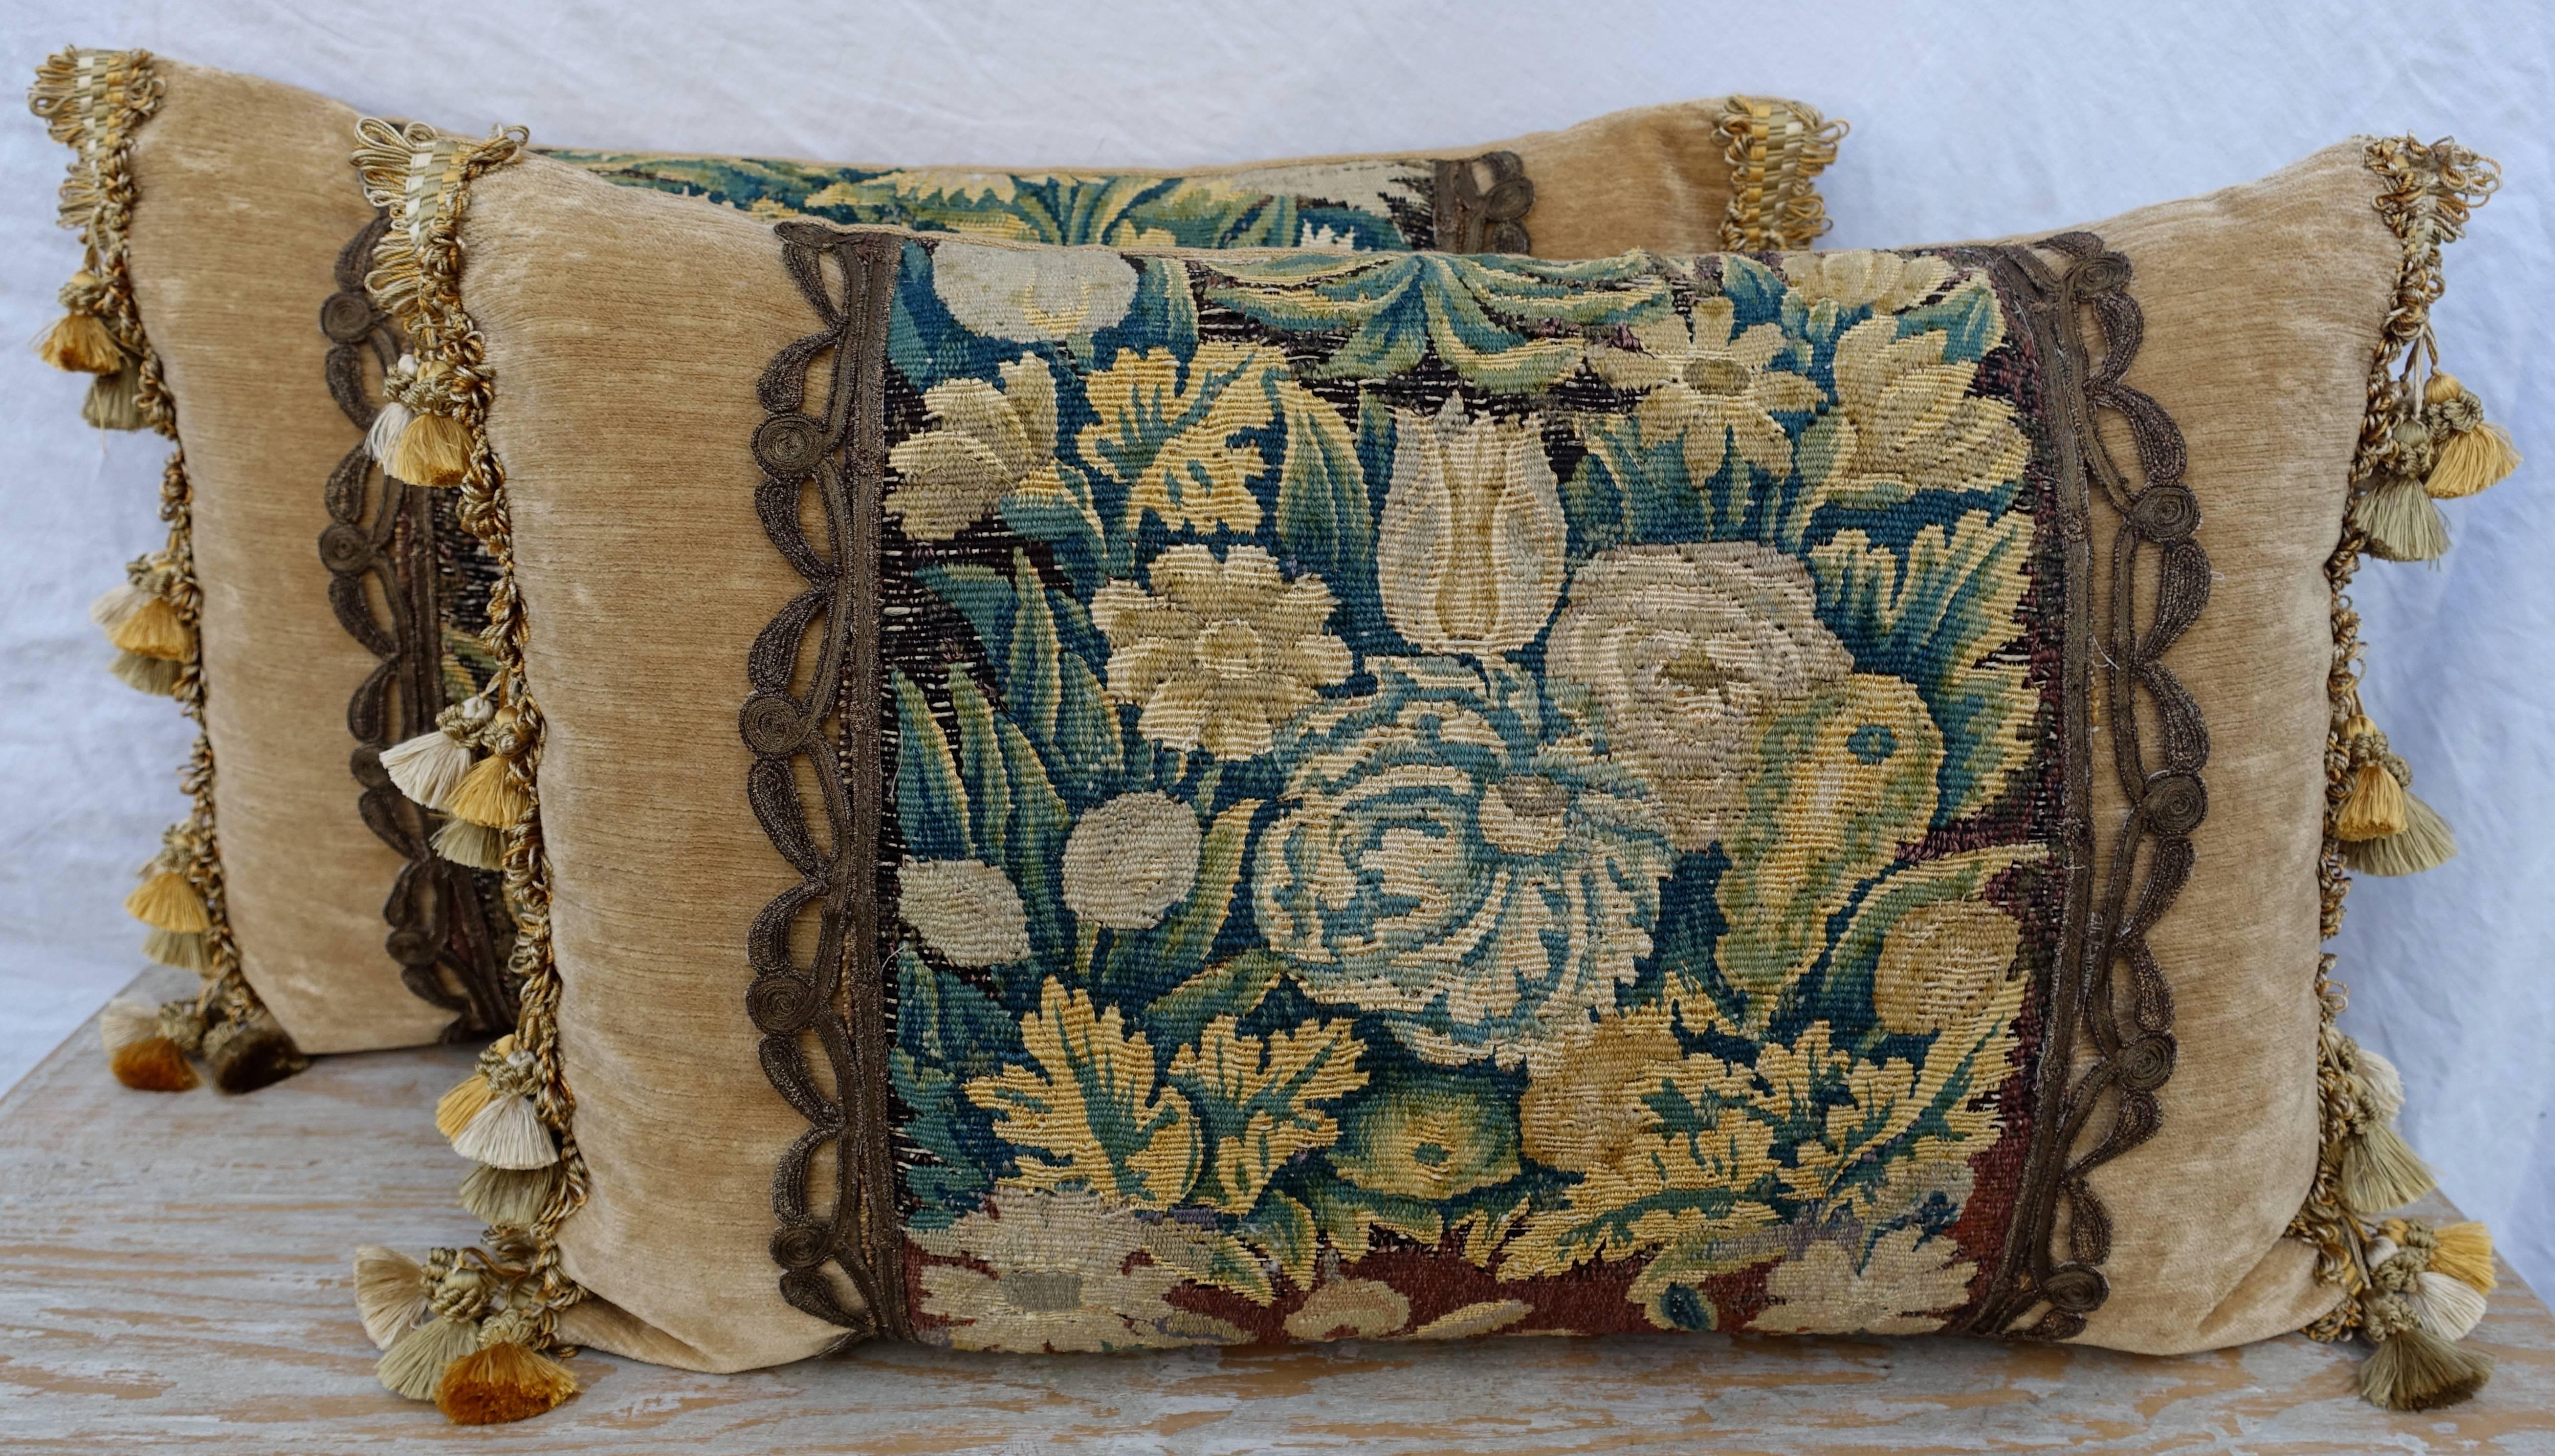 Other 17th Century Flemish Tapestry Pillows by Melissa Levinson